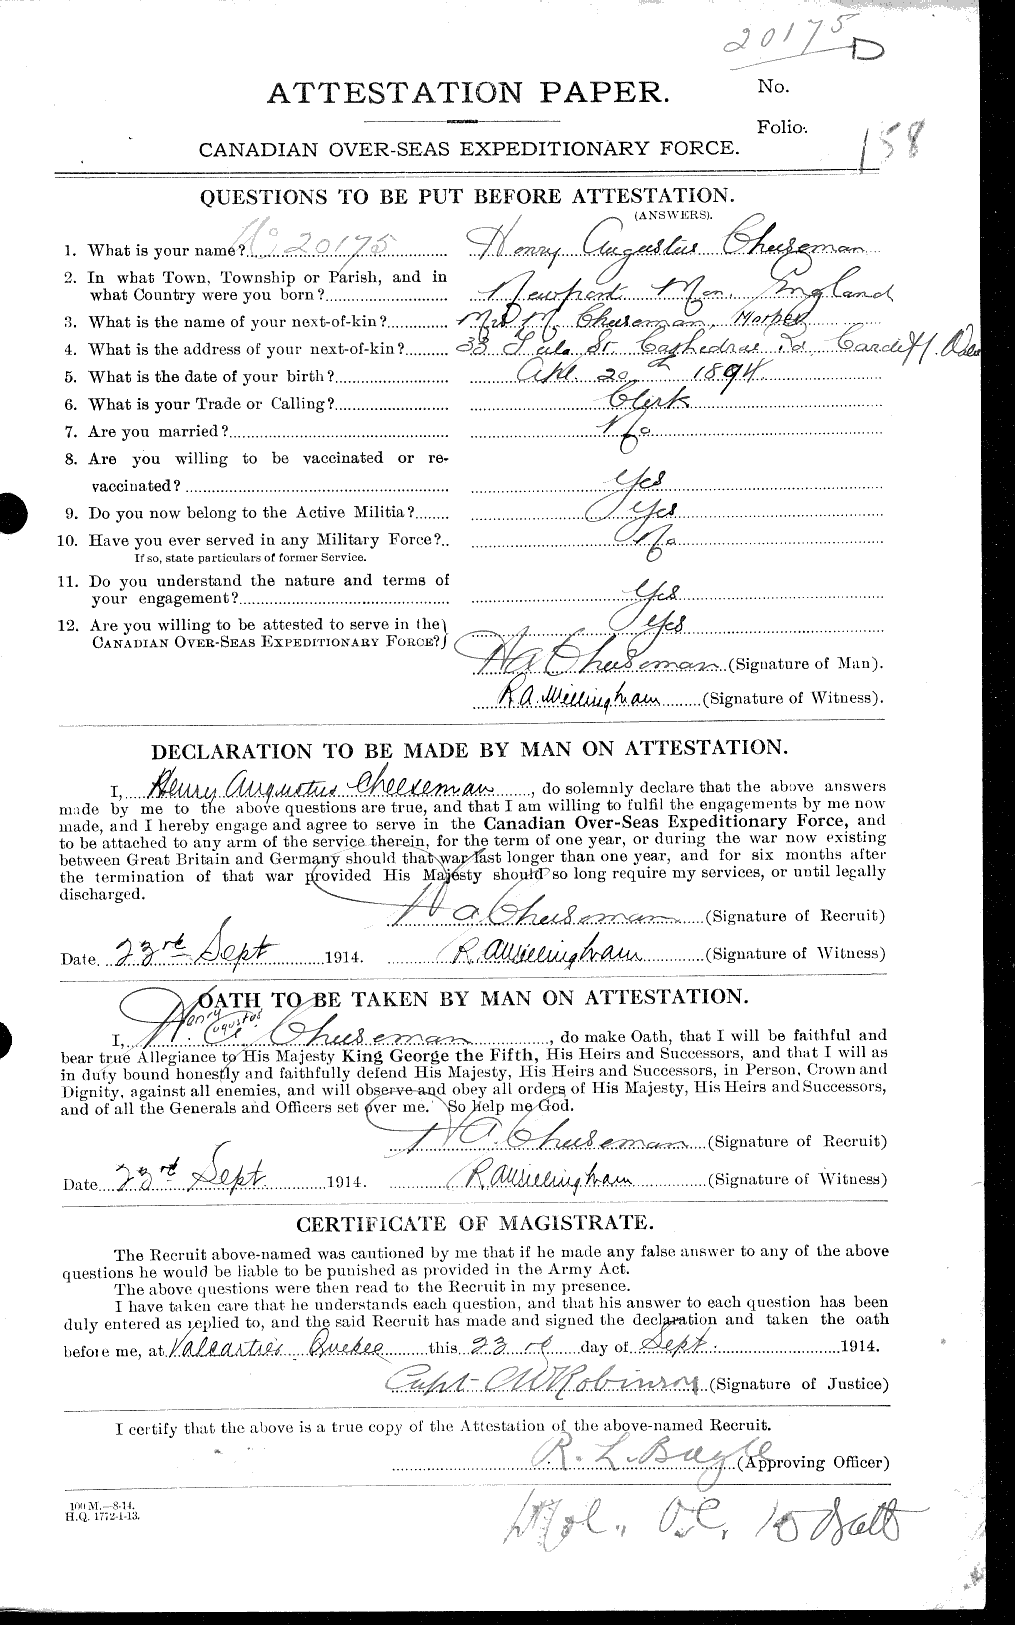 Personnel Records of the First World War - CEF 014390a